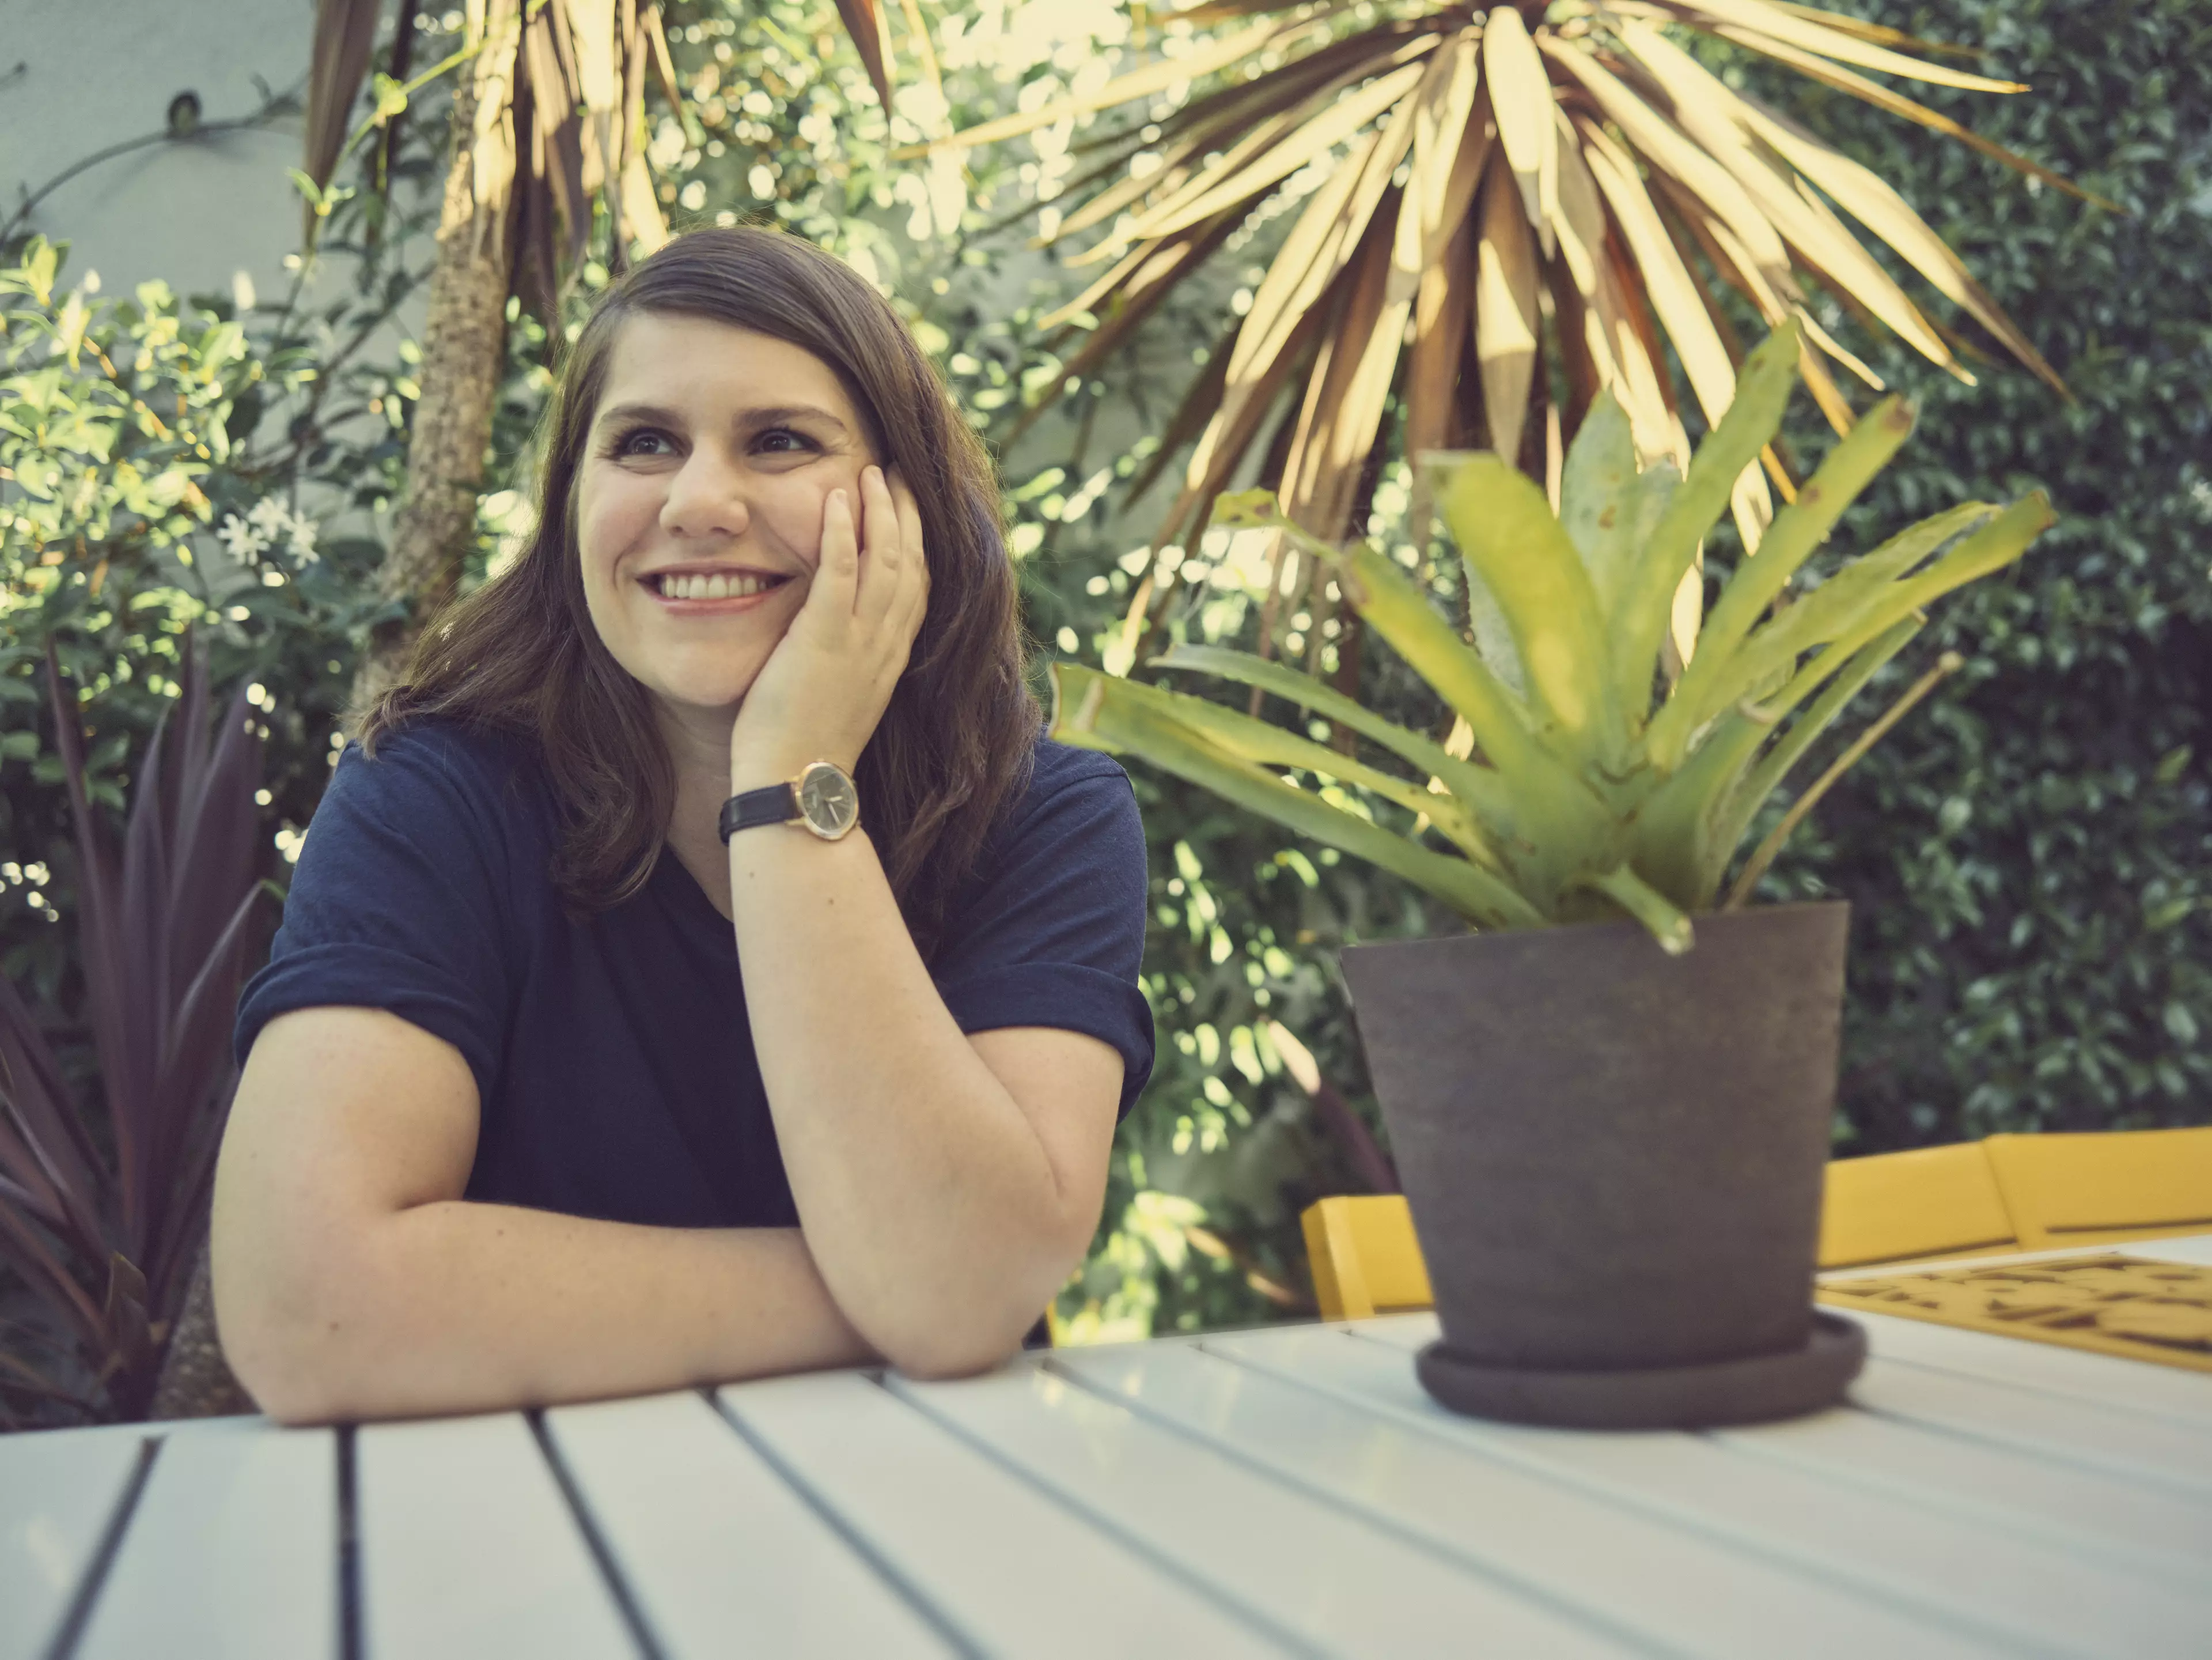 Alex Lahey will be performing at Jameson House of Rounds on October 19.